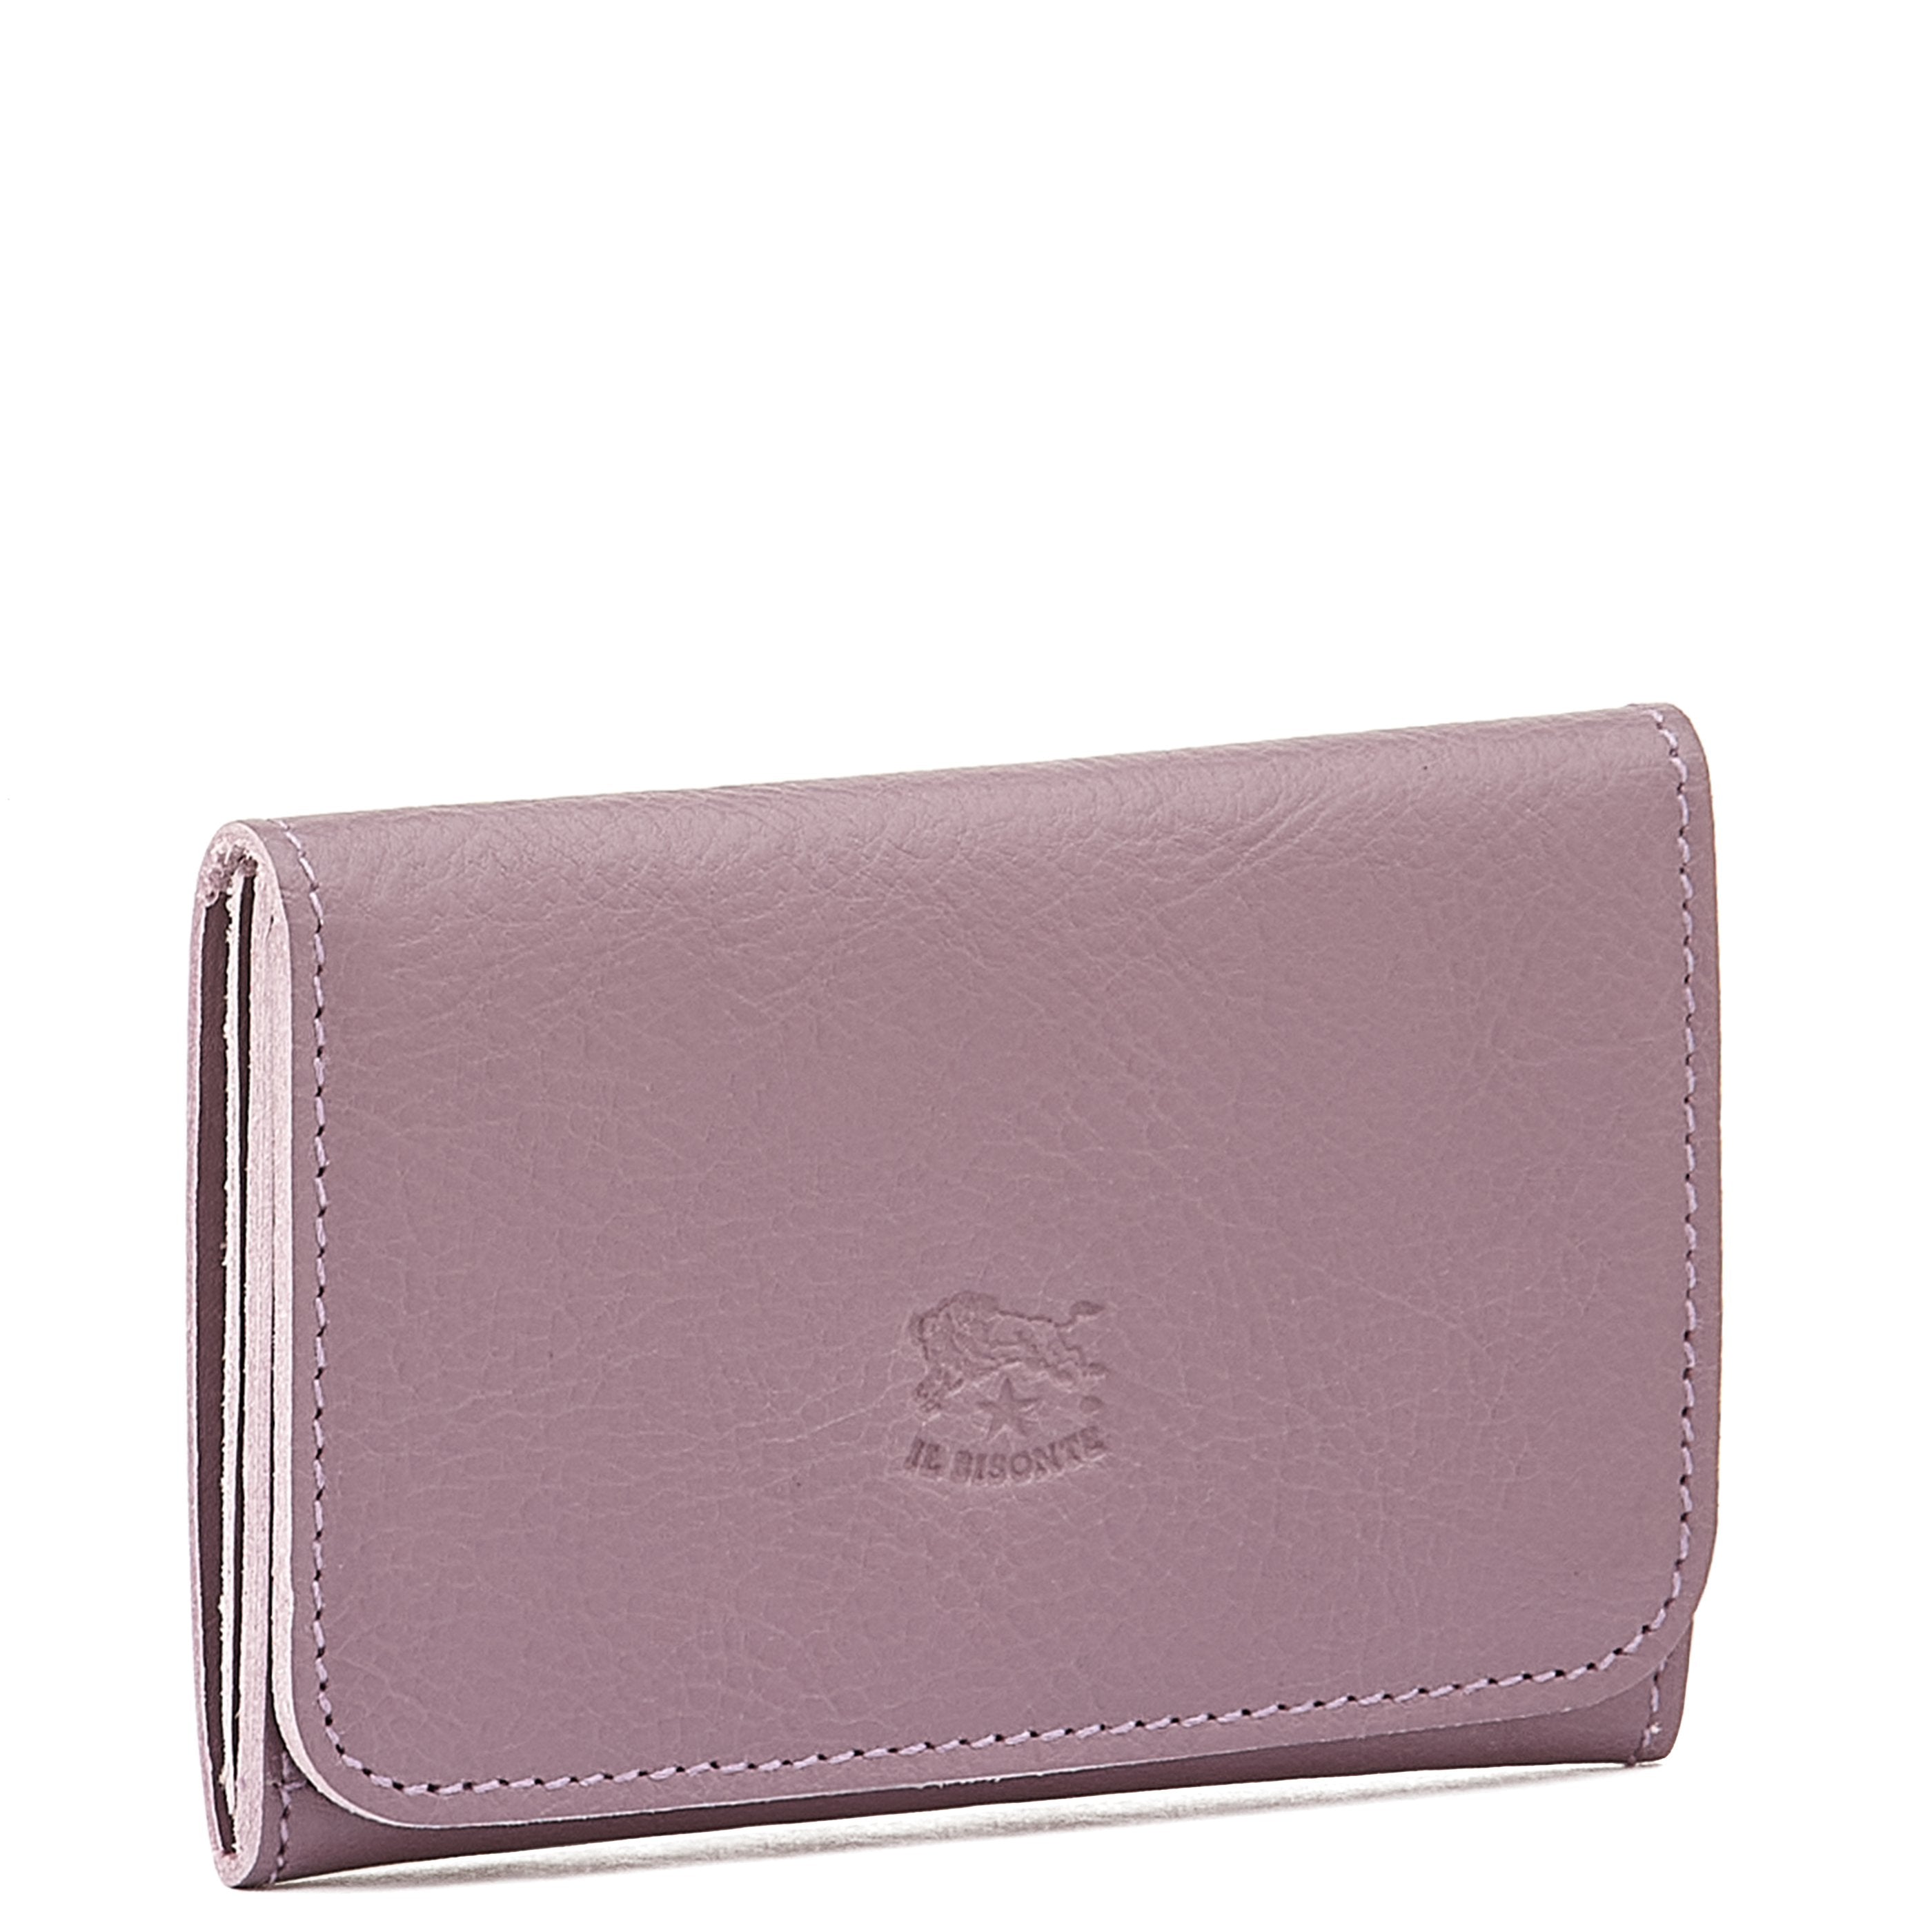 Card case in leather color wisteria